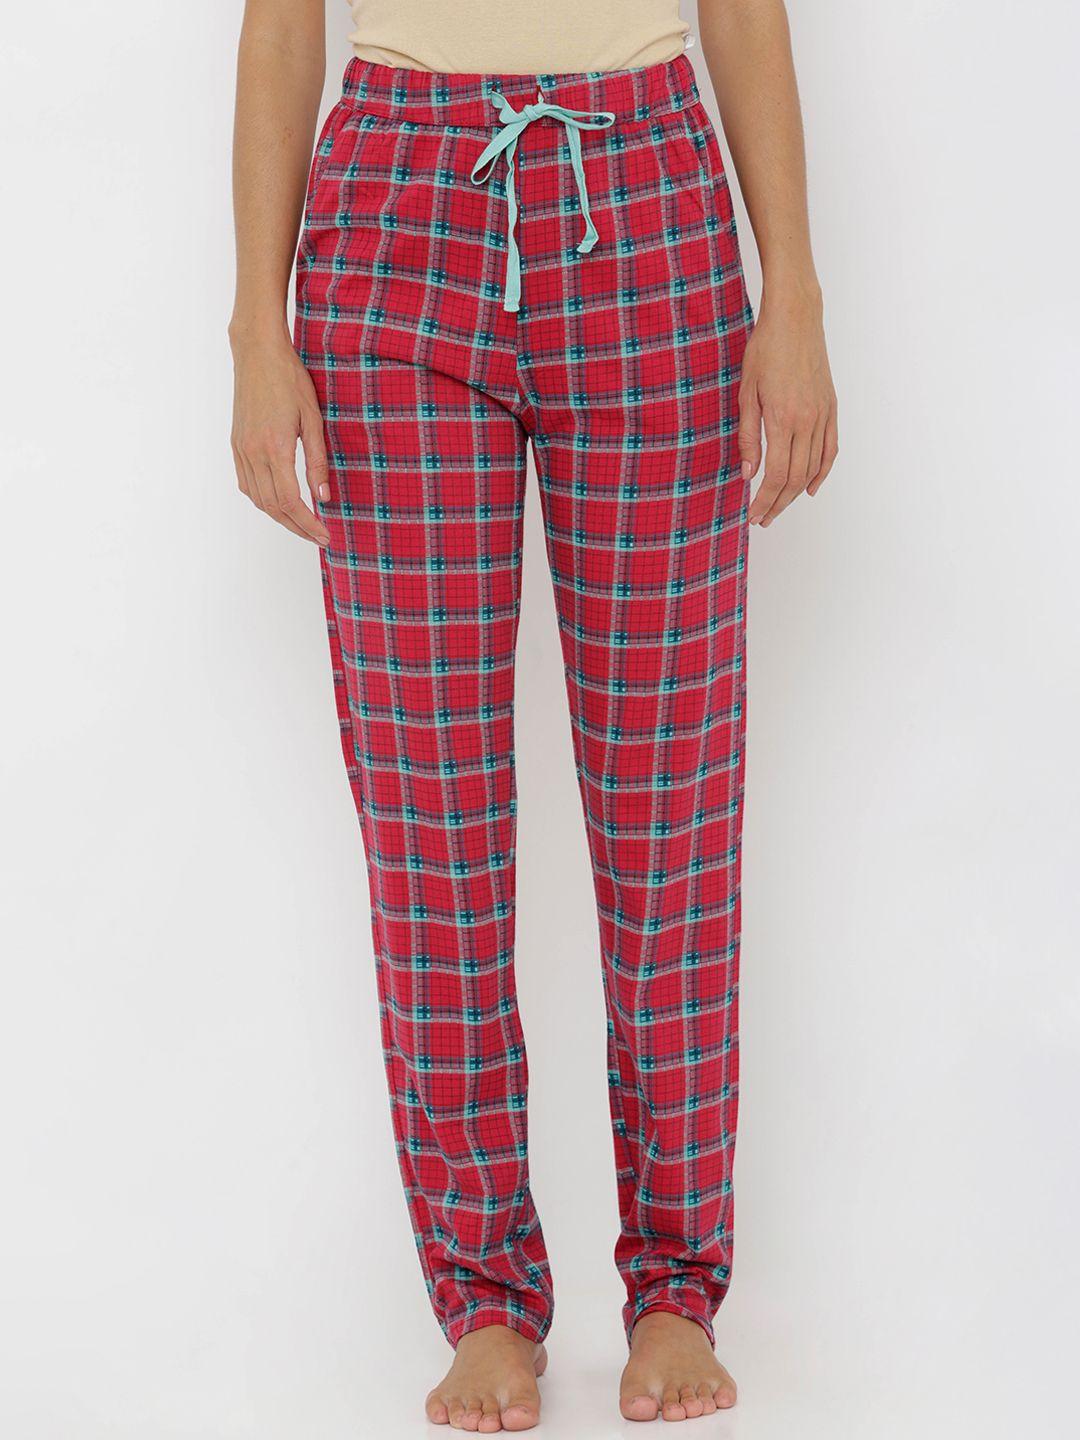 candour-london-women-red-checked-lounge-pant